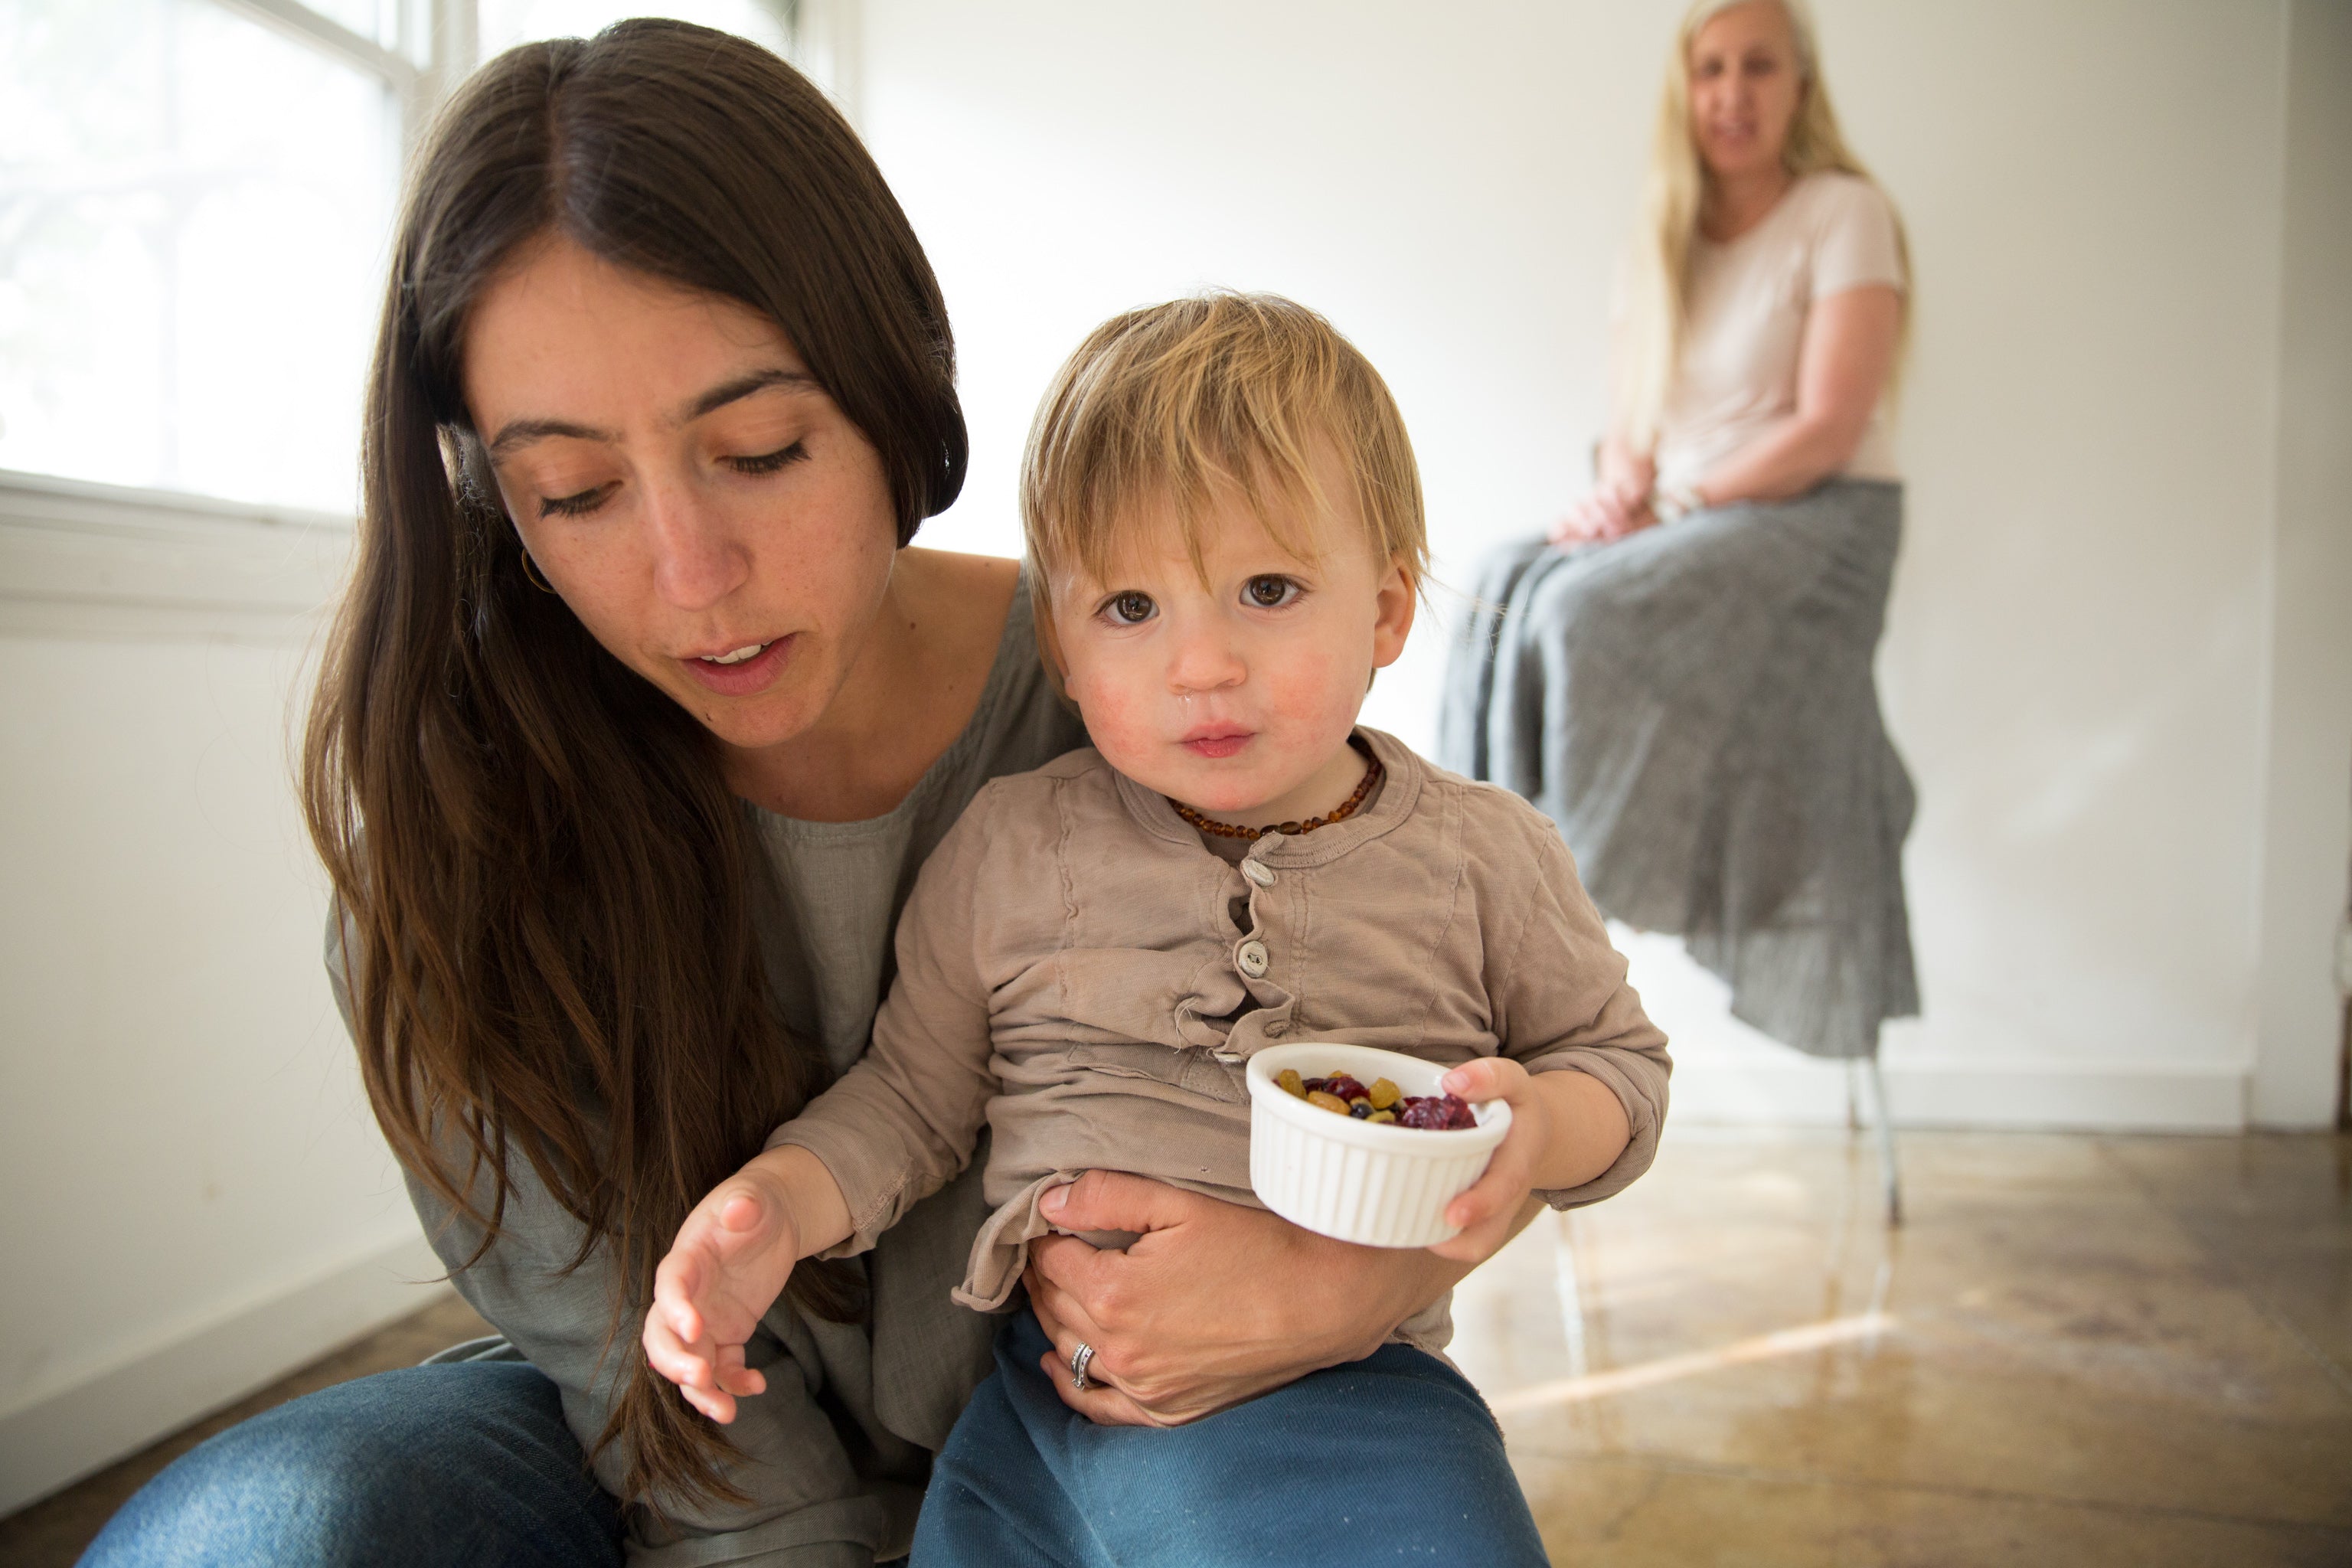 Dotter owner, Annika Huston, crouched with toddler son in foreground and mother, Susanne McLean seated in background